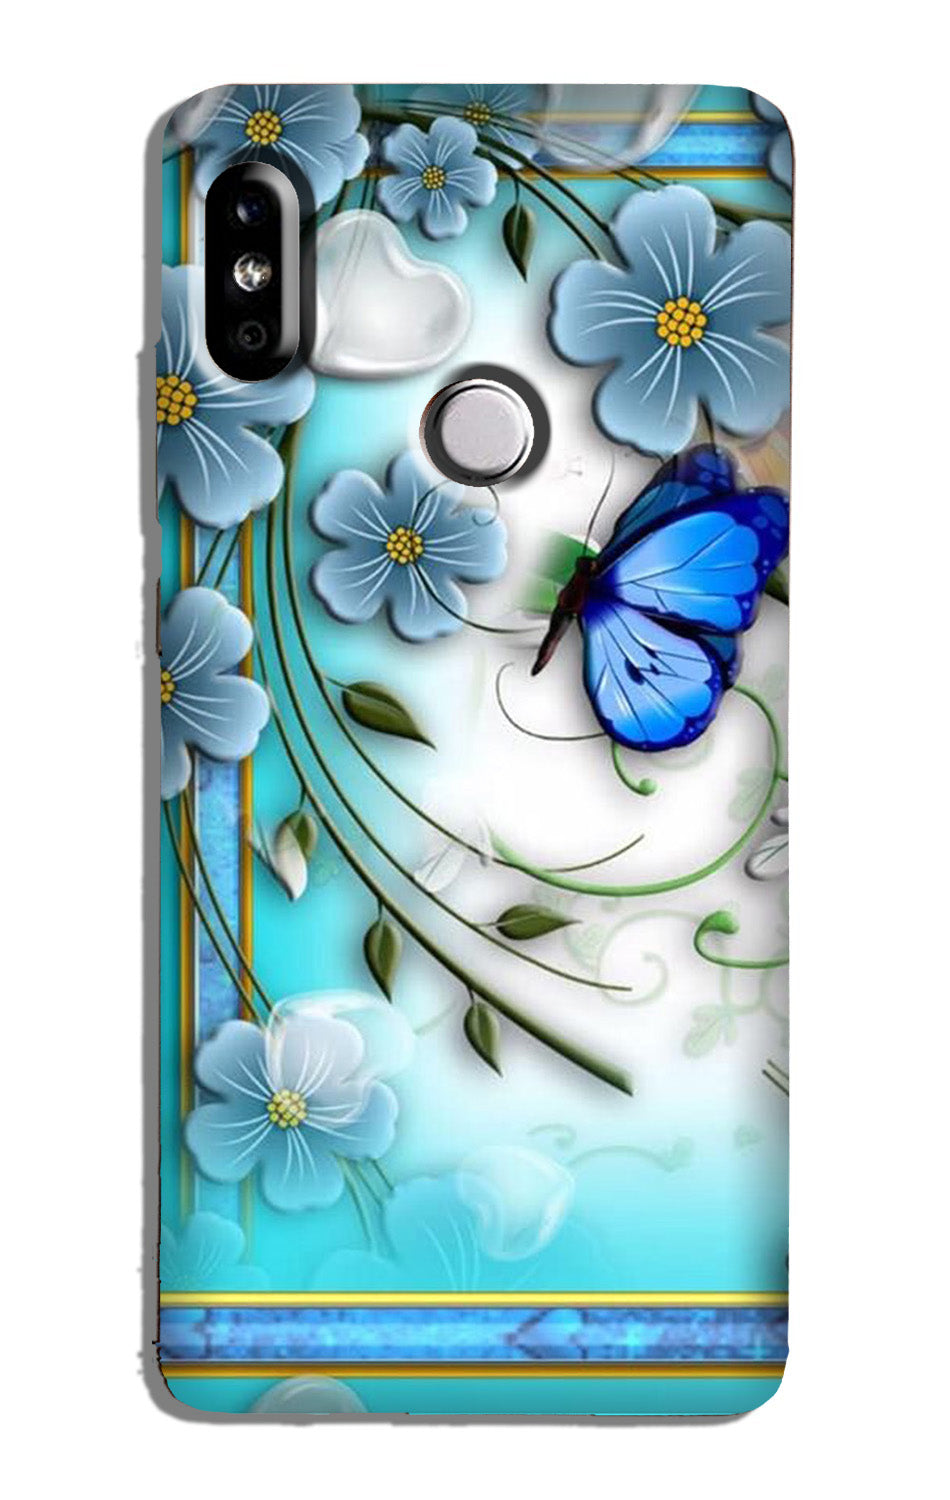 Blue Butterfly  Case for Redmi 6 Pro